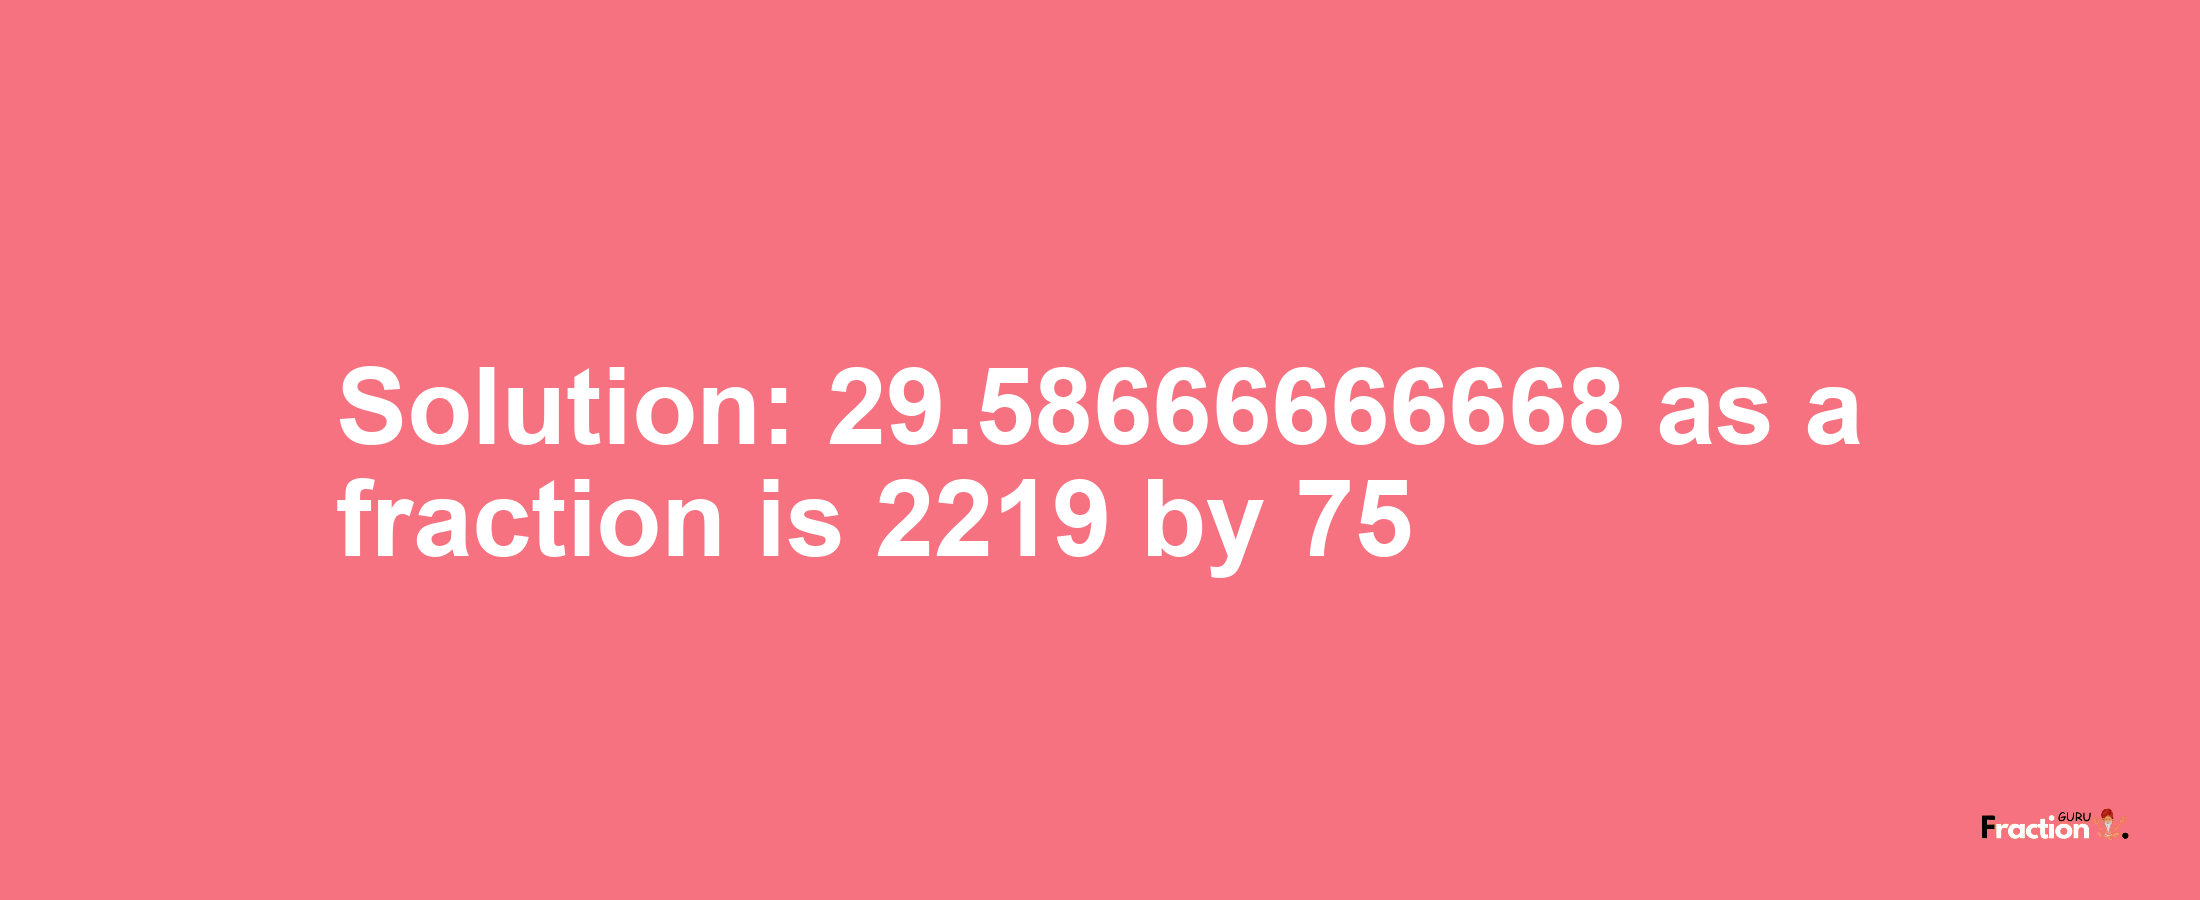 Solution:29.58666666668 as a fraction is 2219/75